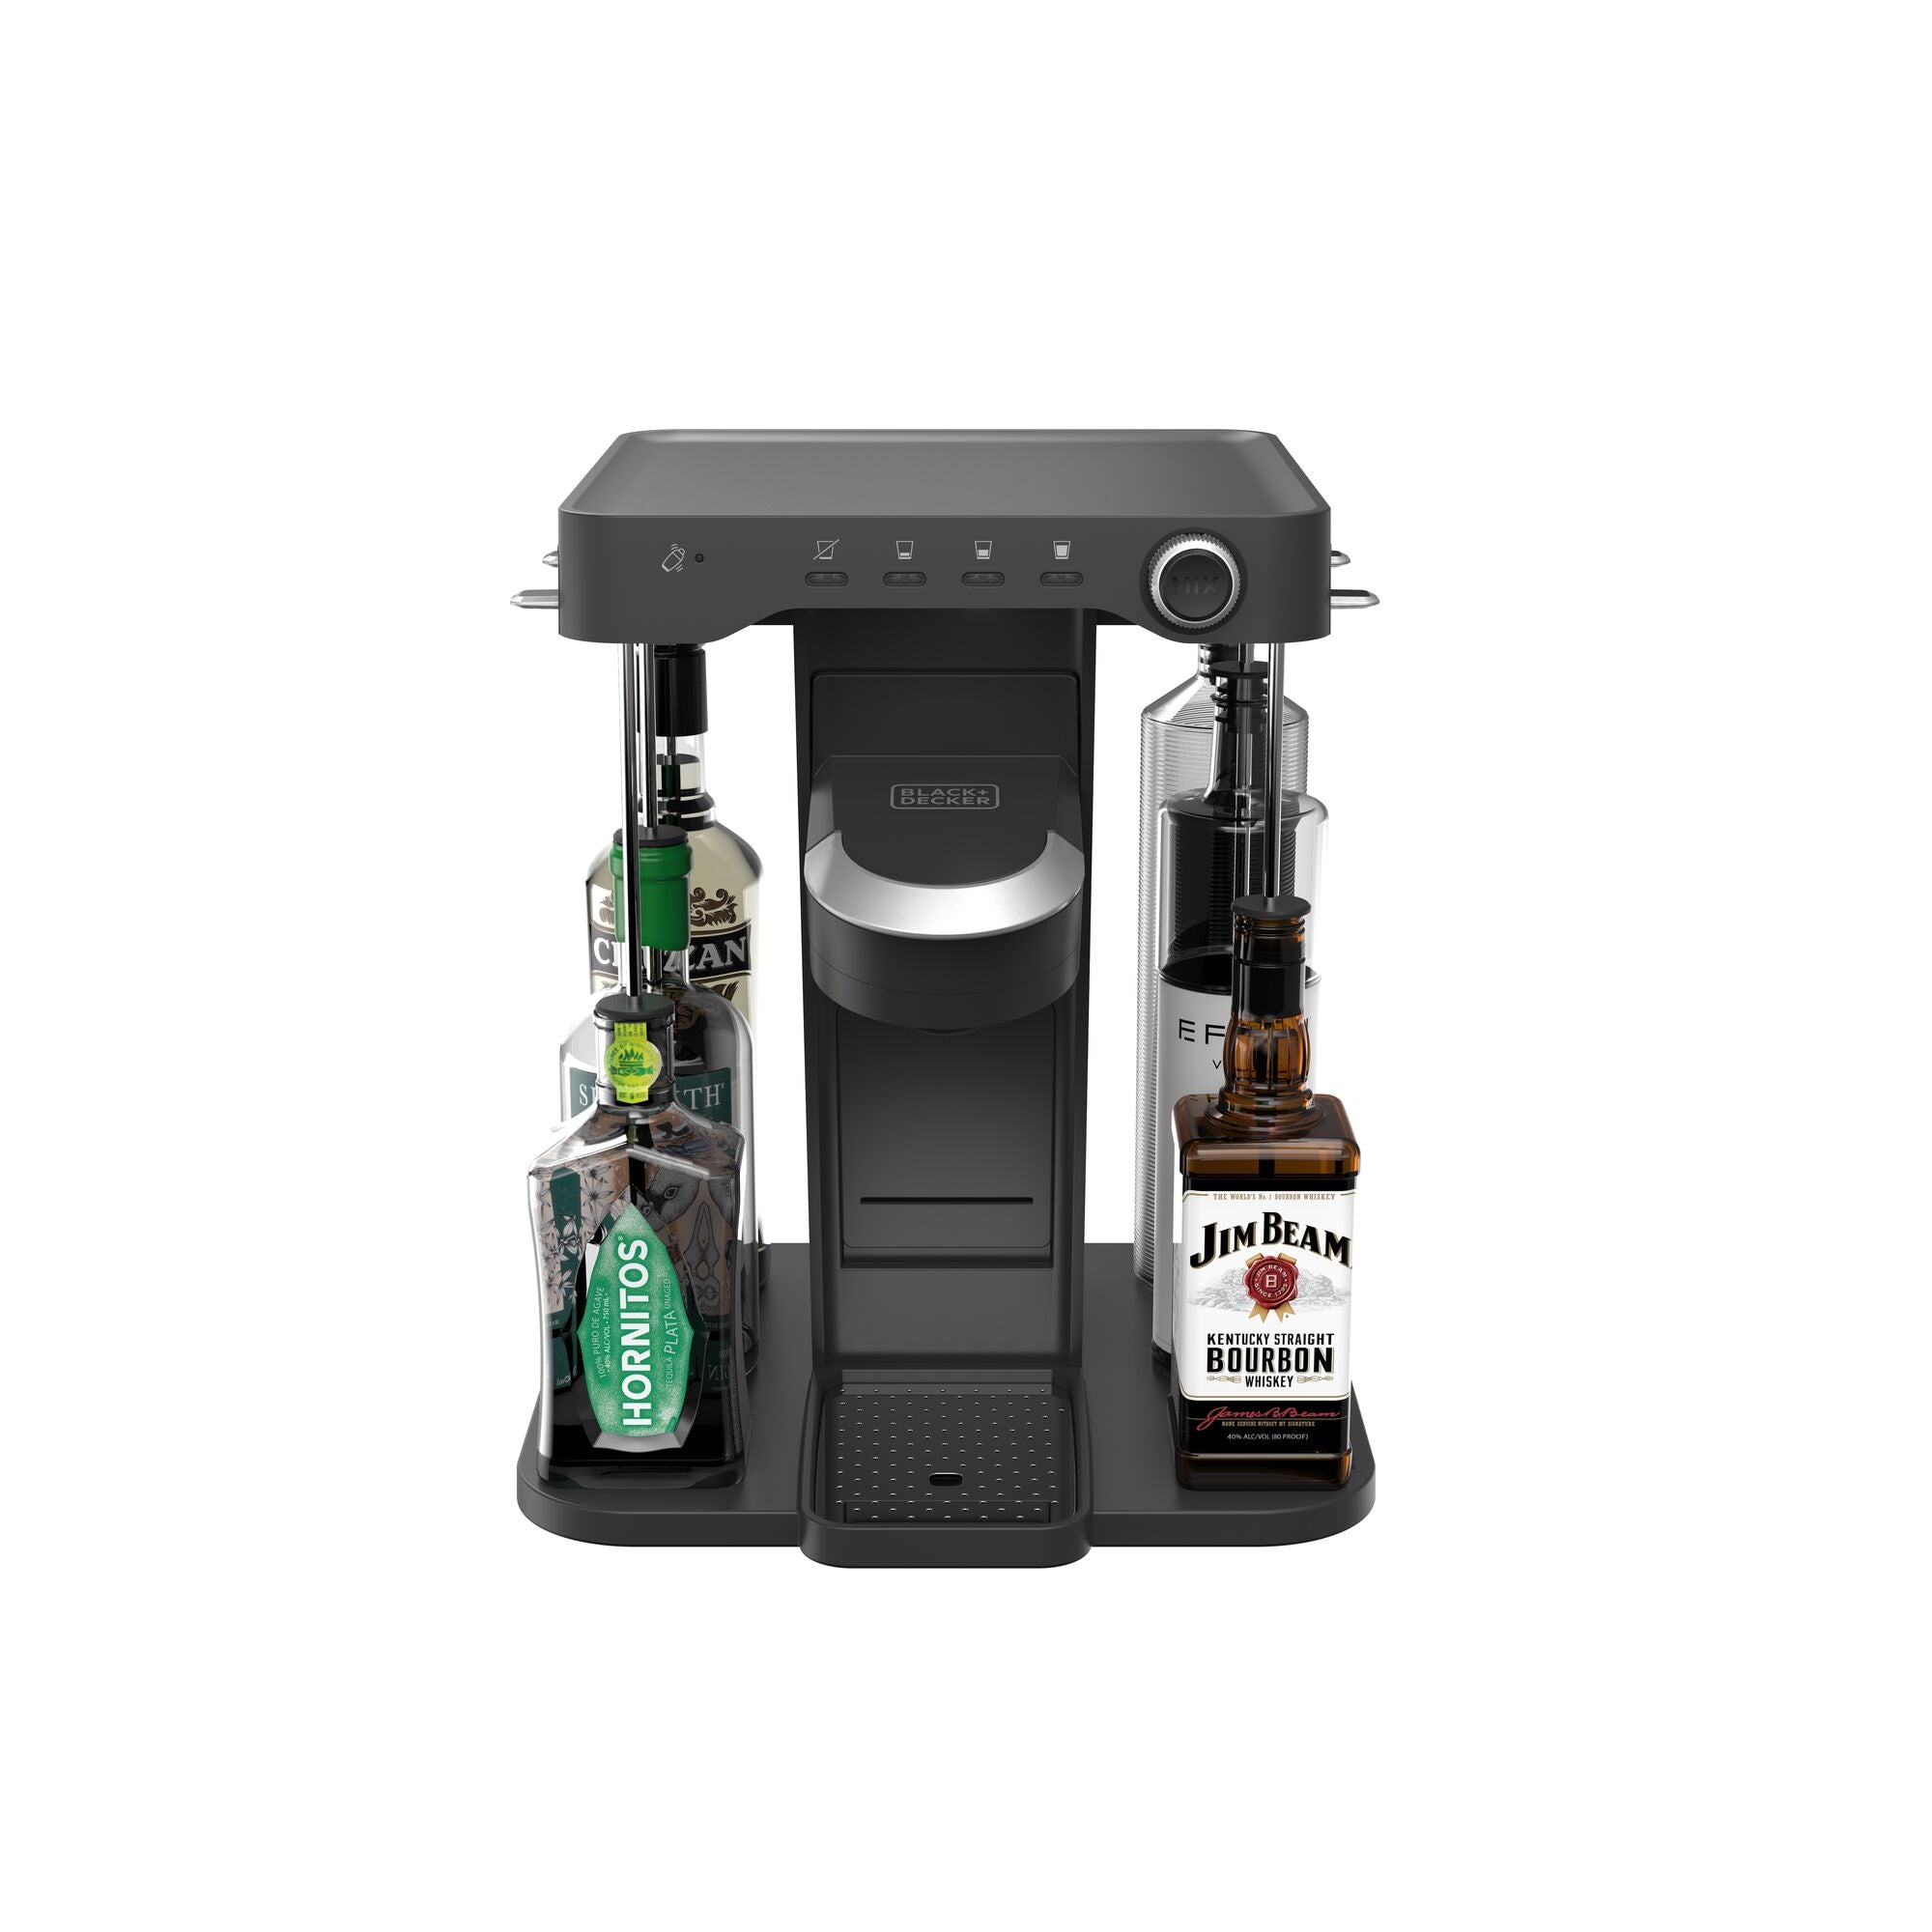 3/4 view of bev by BLACK+DECKER™ cocktail maker with a freshly made margarita on an outdoor wooden serving table with an ice bucket and assorted garnishes